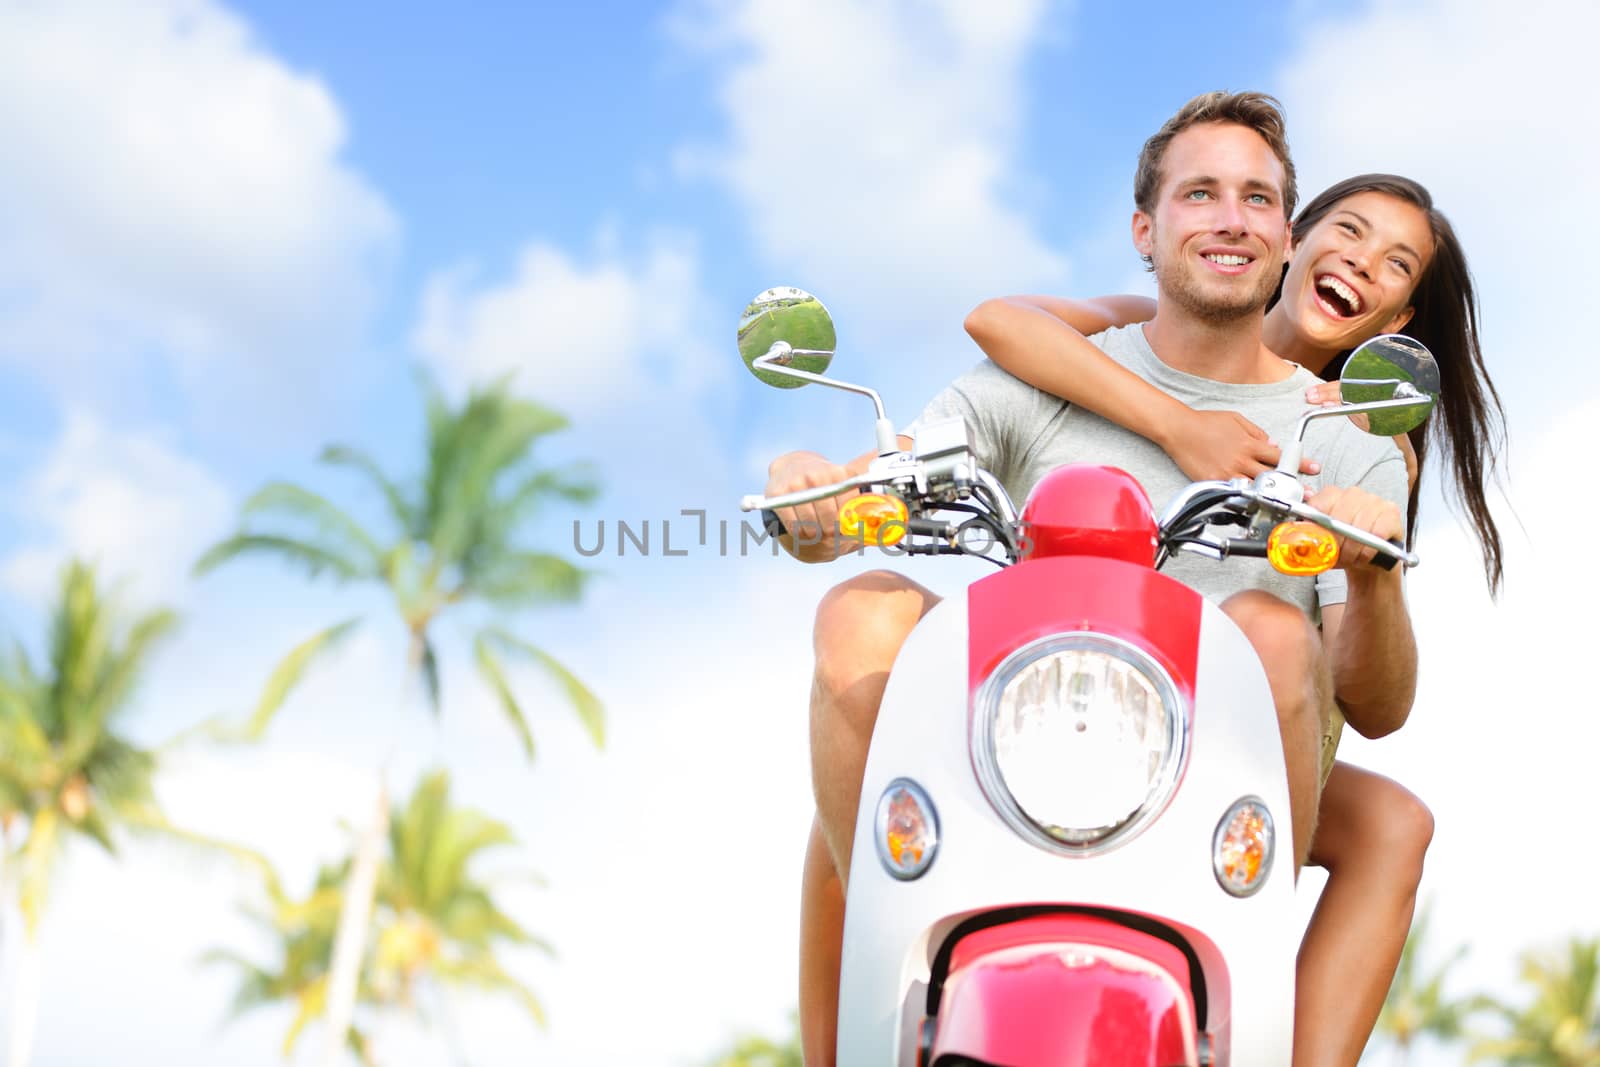 Free young couple on scooter happy on summer vacation holidays. Multiethnic cheerful couple having fun driving scooter together outdoors. Lifestyle image with Caucasian man, Asian woman.